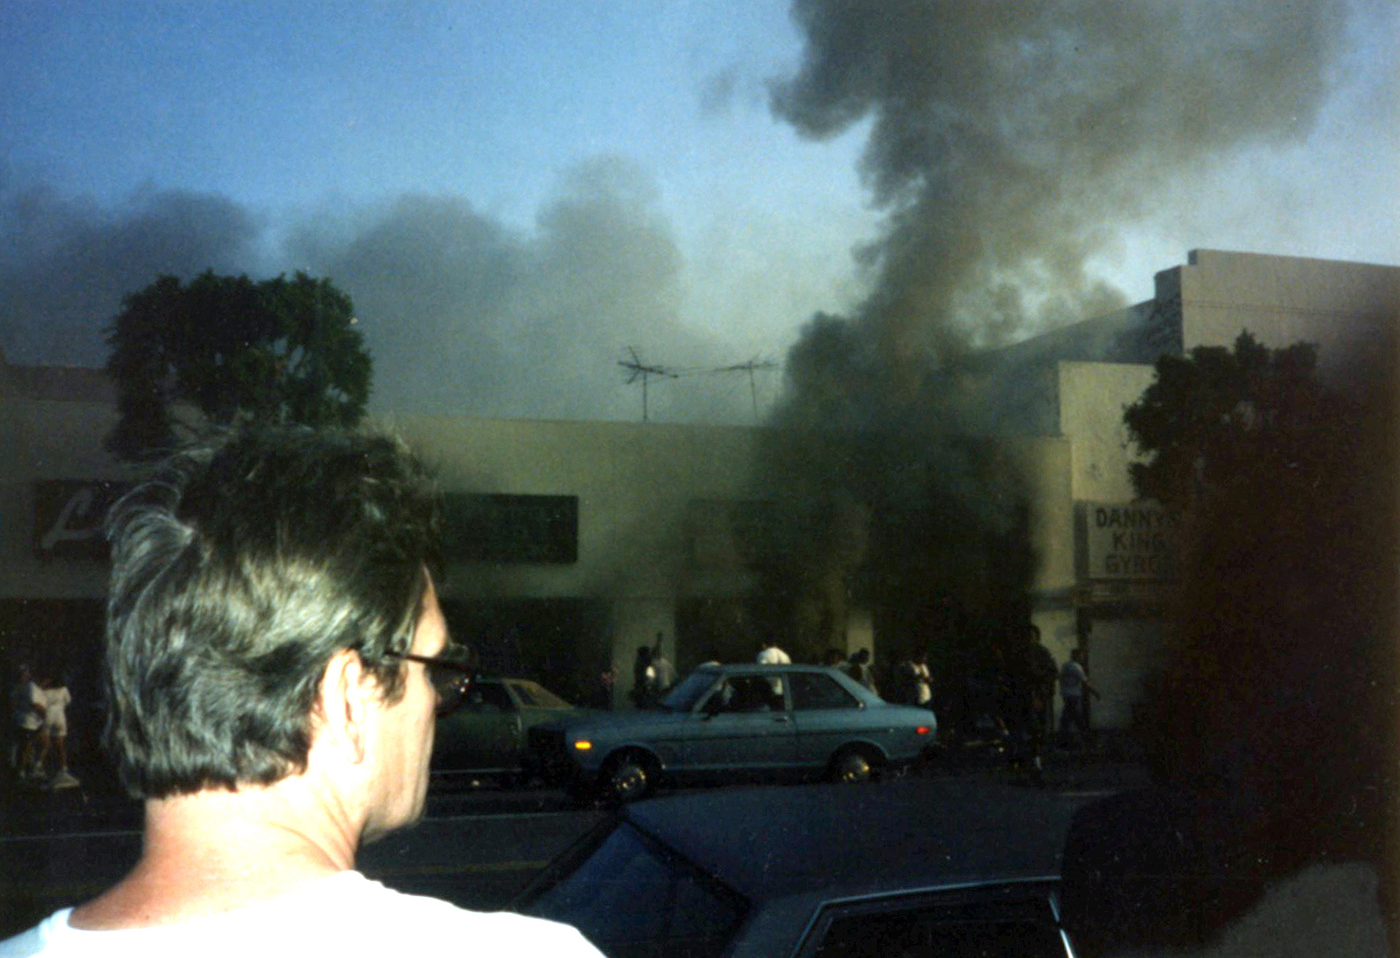 Smoke rises from a building set on fire on Hollywood Blvd. during riots in Los Angeles in April 1992. Photo by Ricky Bonilla/Creative Commons